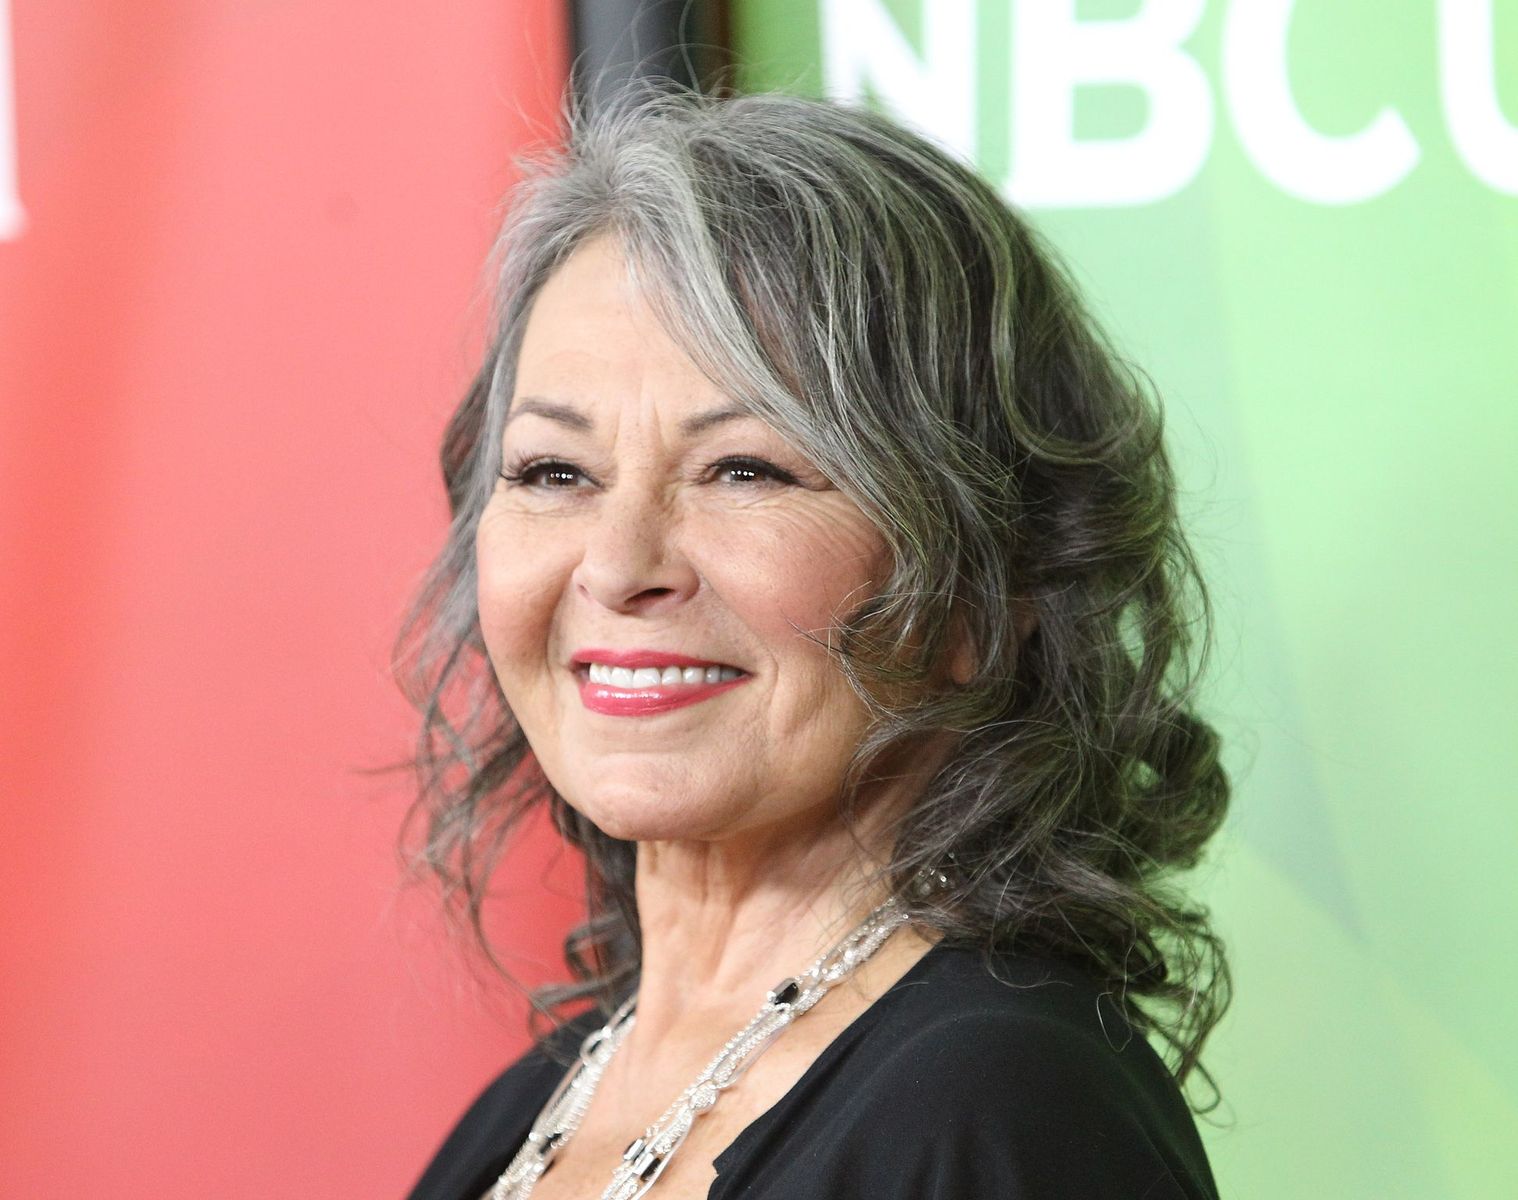 Roseanne Barr at the NBCUniversal's Summer Press Day on April 8, 2014, in Pasadena, California. | Source: Michael Tran/FilmMagic/Getty Images